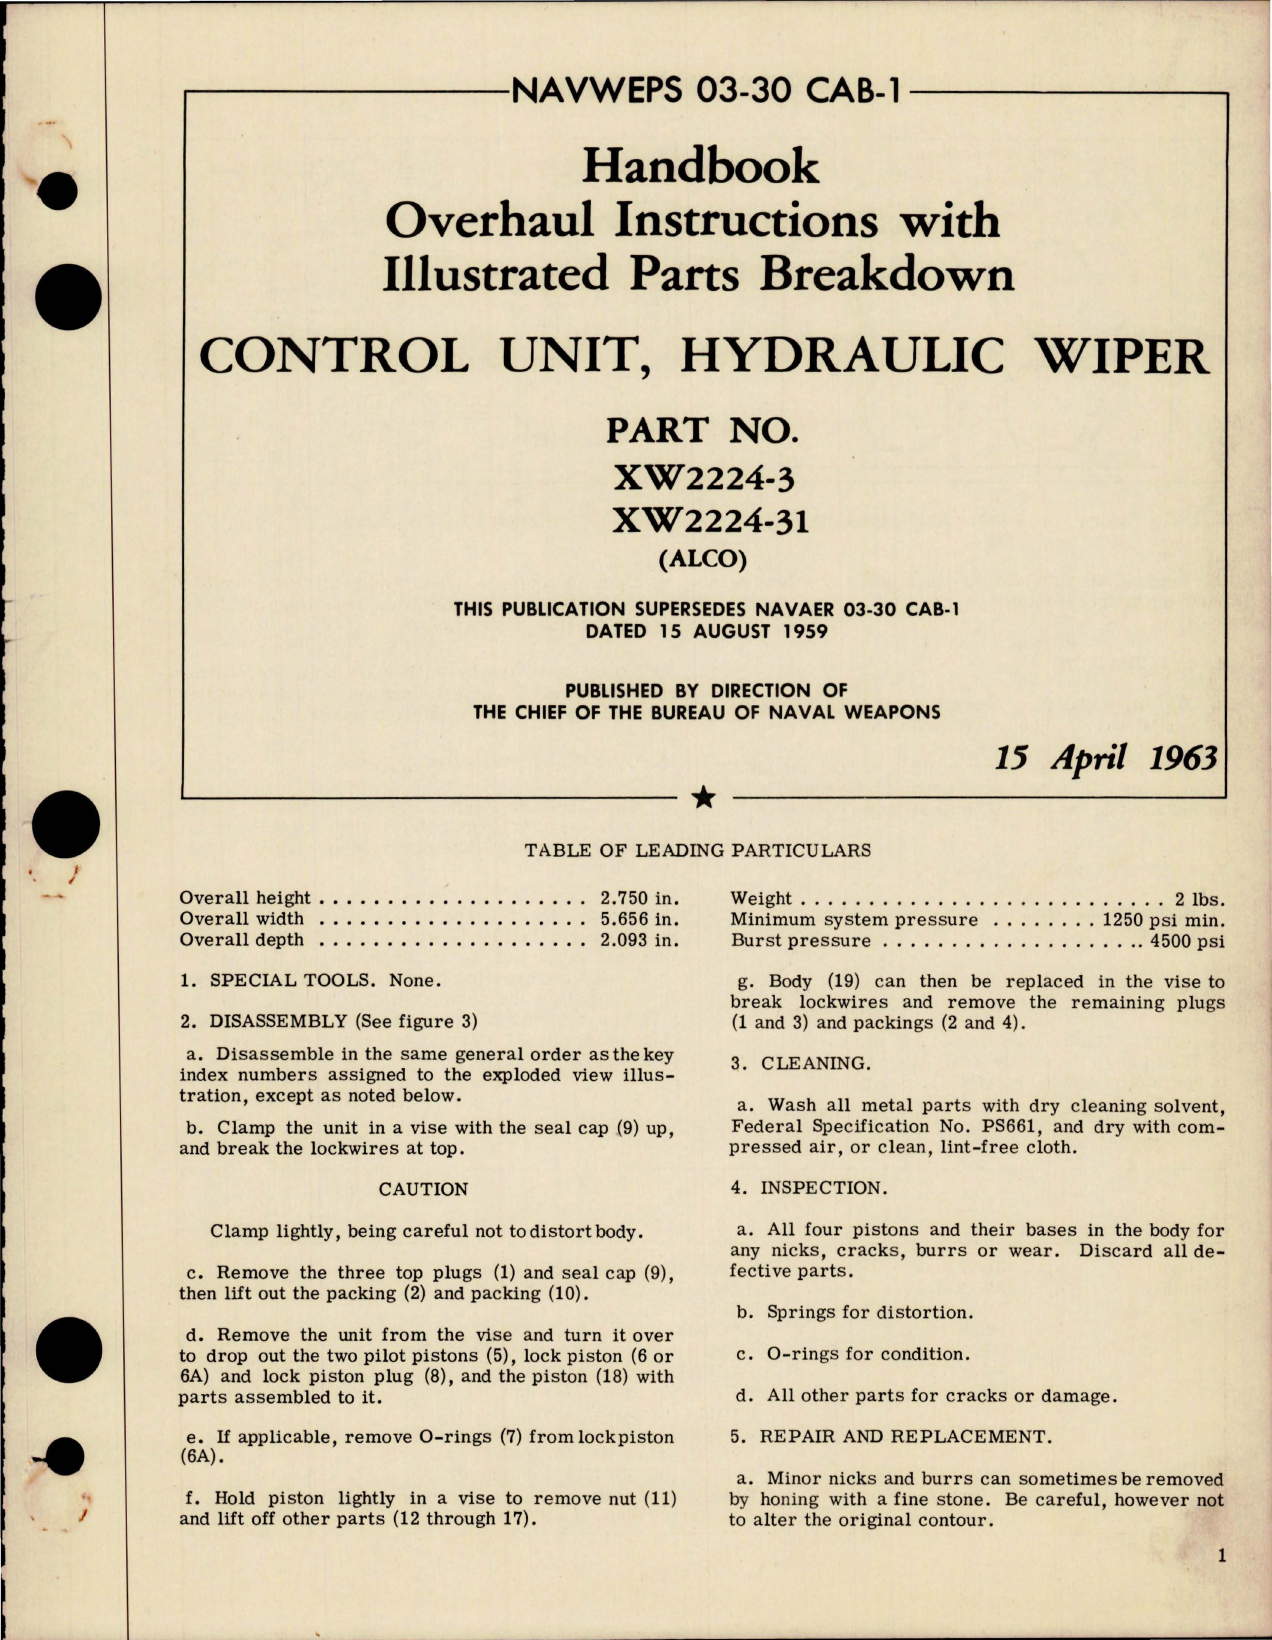 Sample page 1 from AirCorps Library document: Overhaul Instructions with Illustrated Parts Breakdown for Hydraulic Wiper Control Unit - Part XW2224-3, XW2224-31